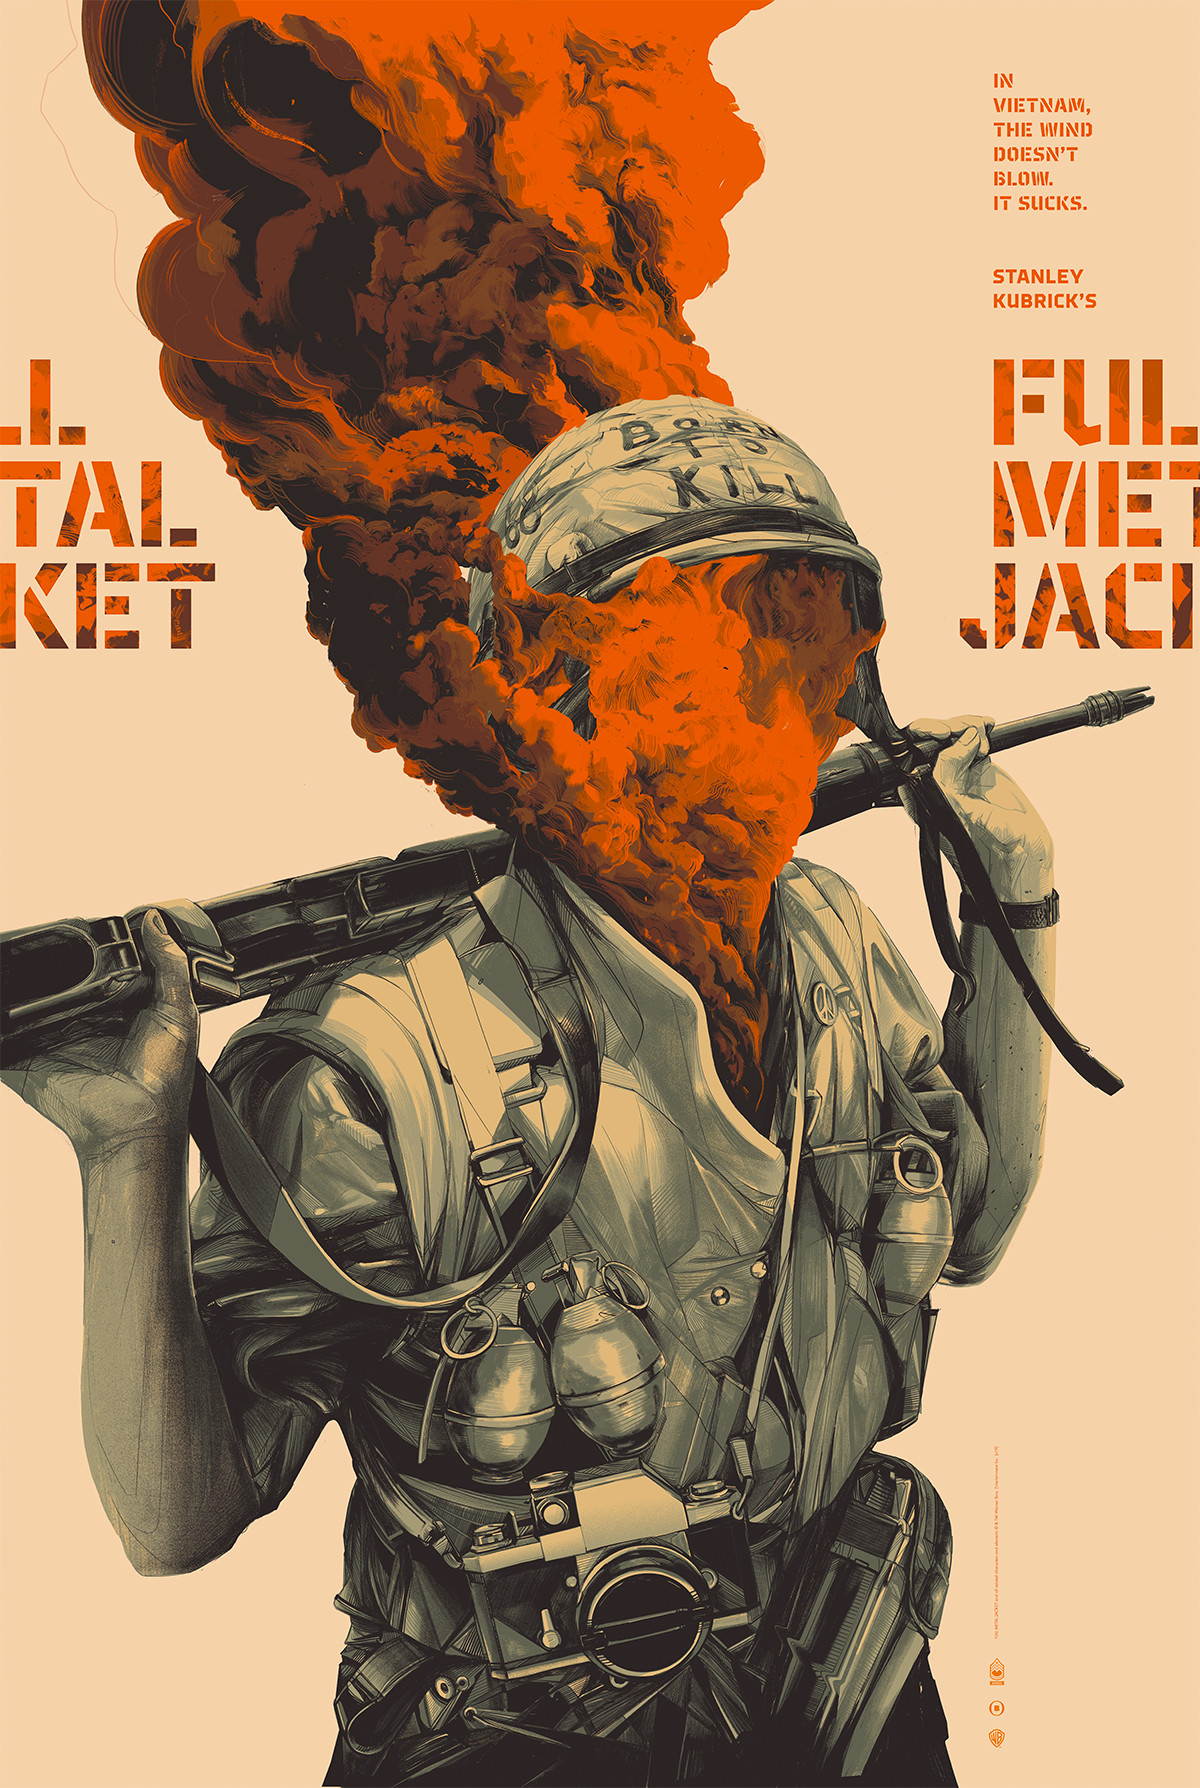 Poster art for Full Metal Jacket showing a smoke-filled face of a soldier wearing a born to kill helmet.